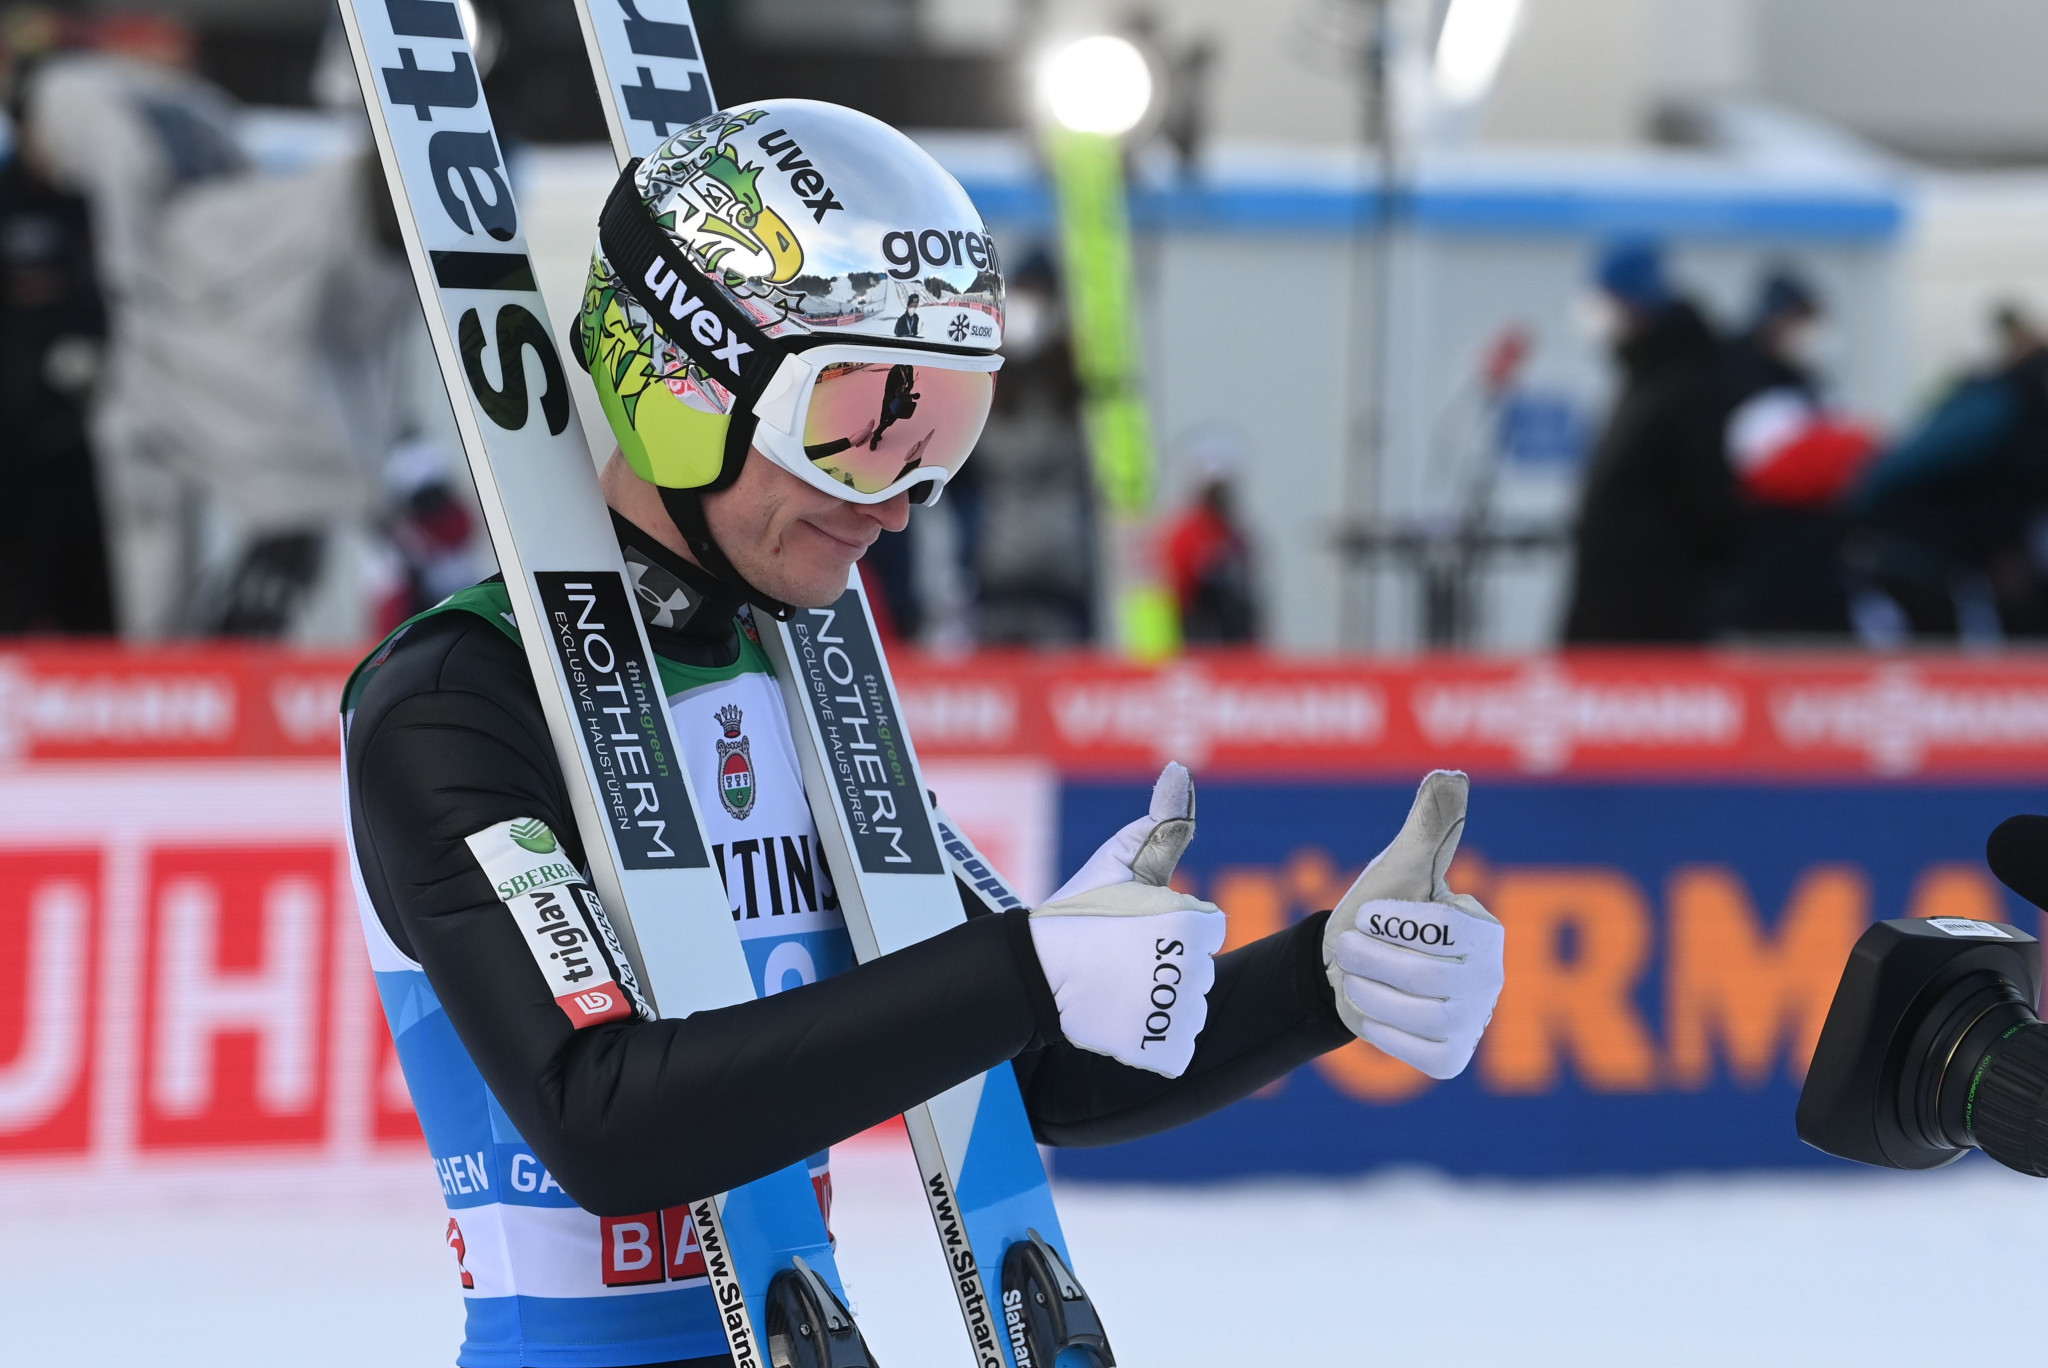 Lanišek ends year on high with Ski Jumping World Cup qualification joy in Germany